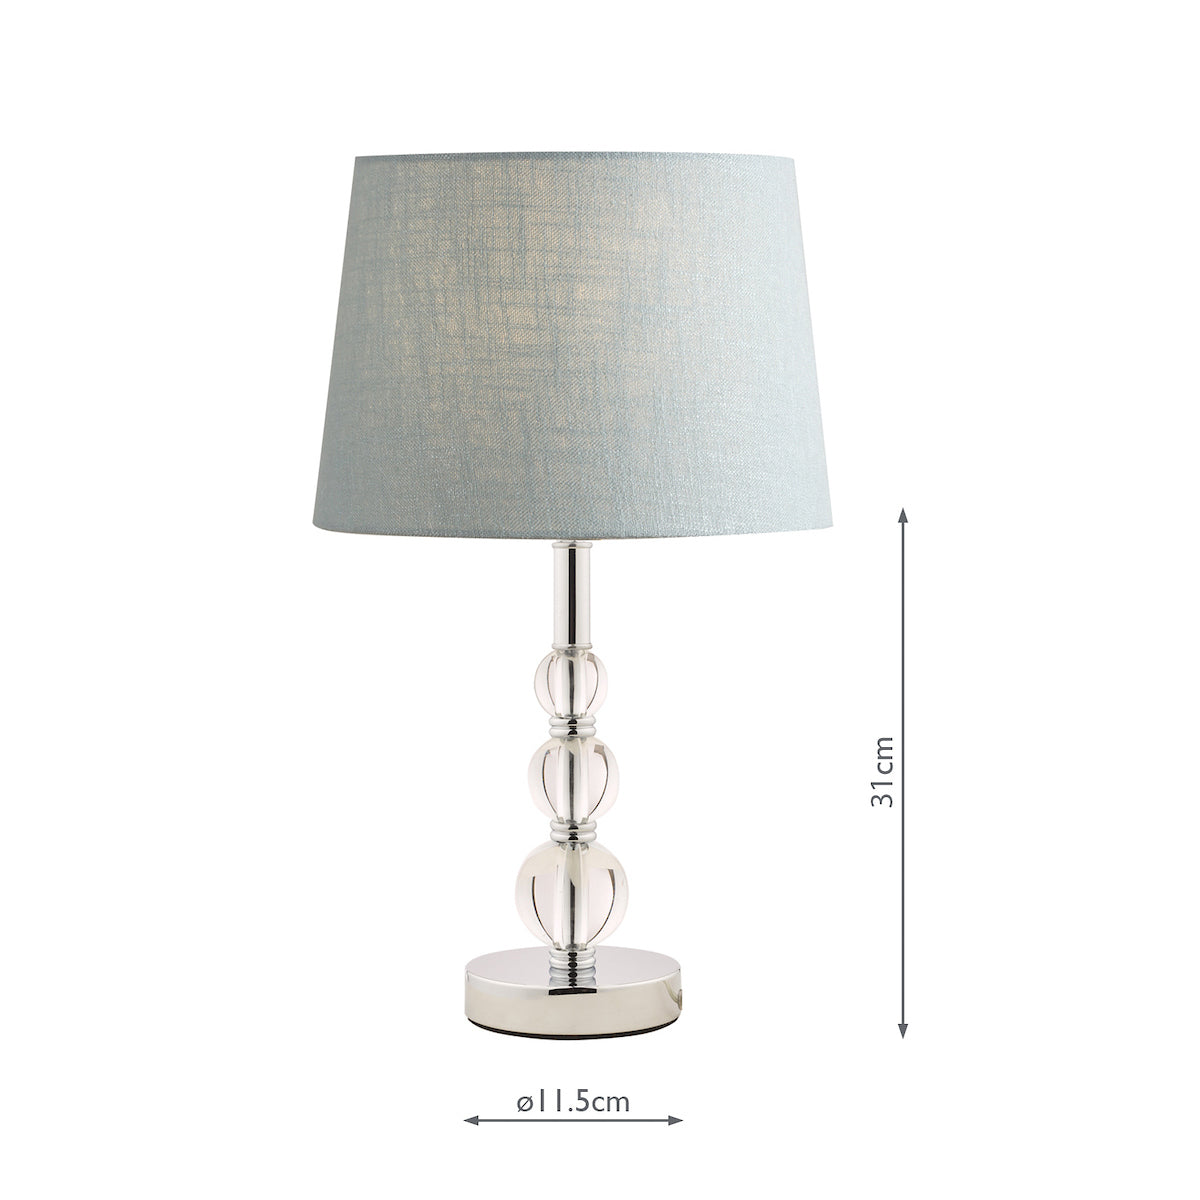 Laura Ashley Selby Polished Nickel & Glass Ball LA3732148-QTable Lamp Base Small